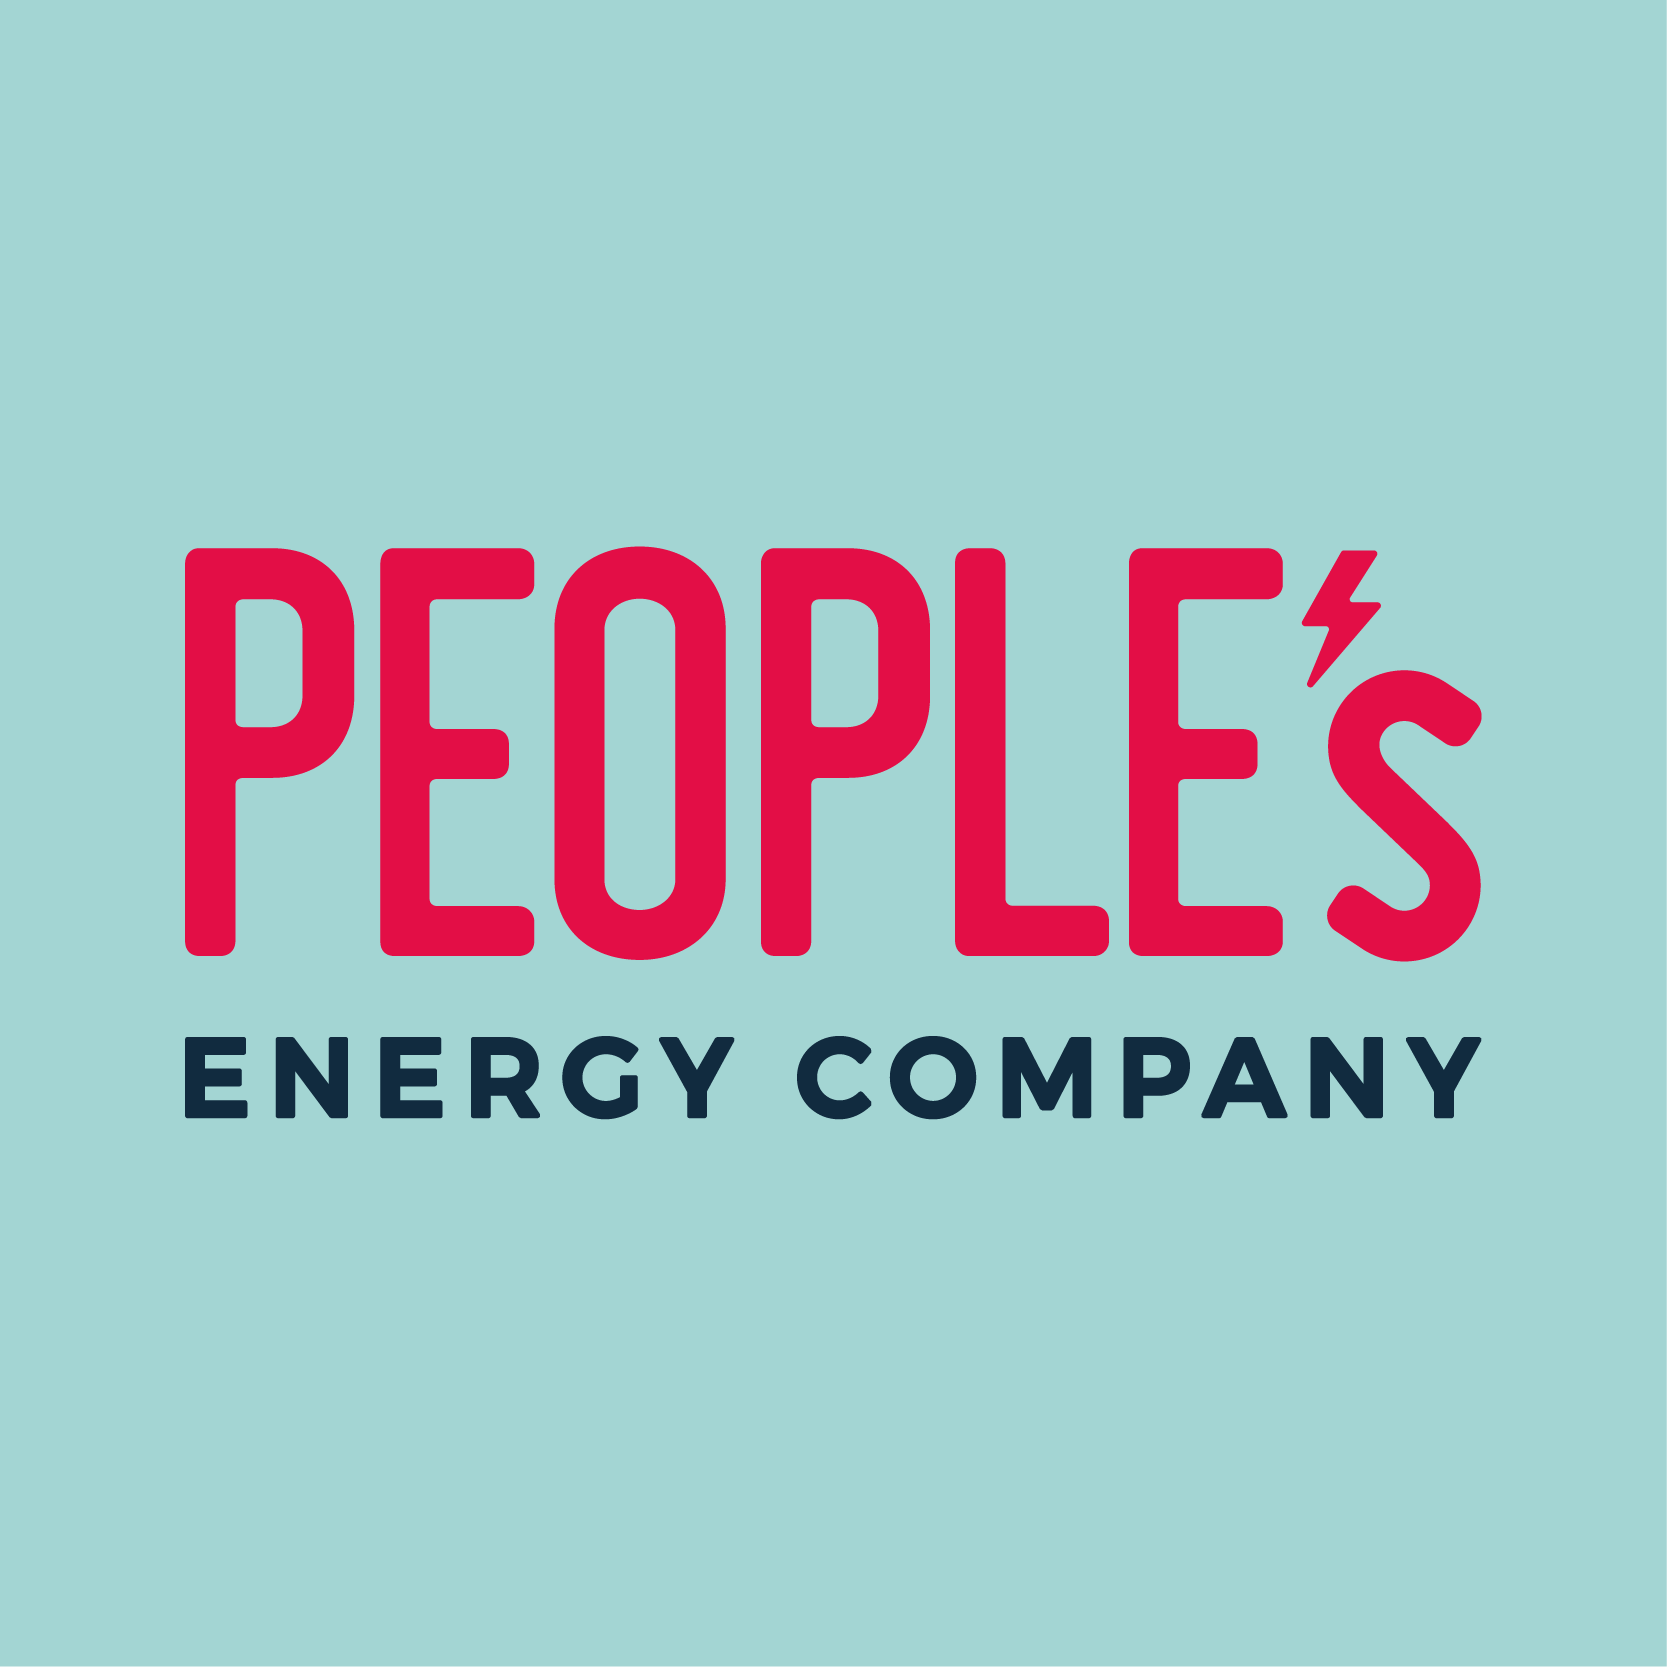 People’s Energy and Utility Point cease trading